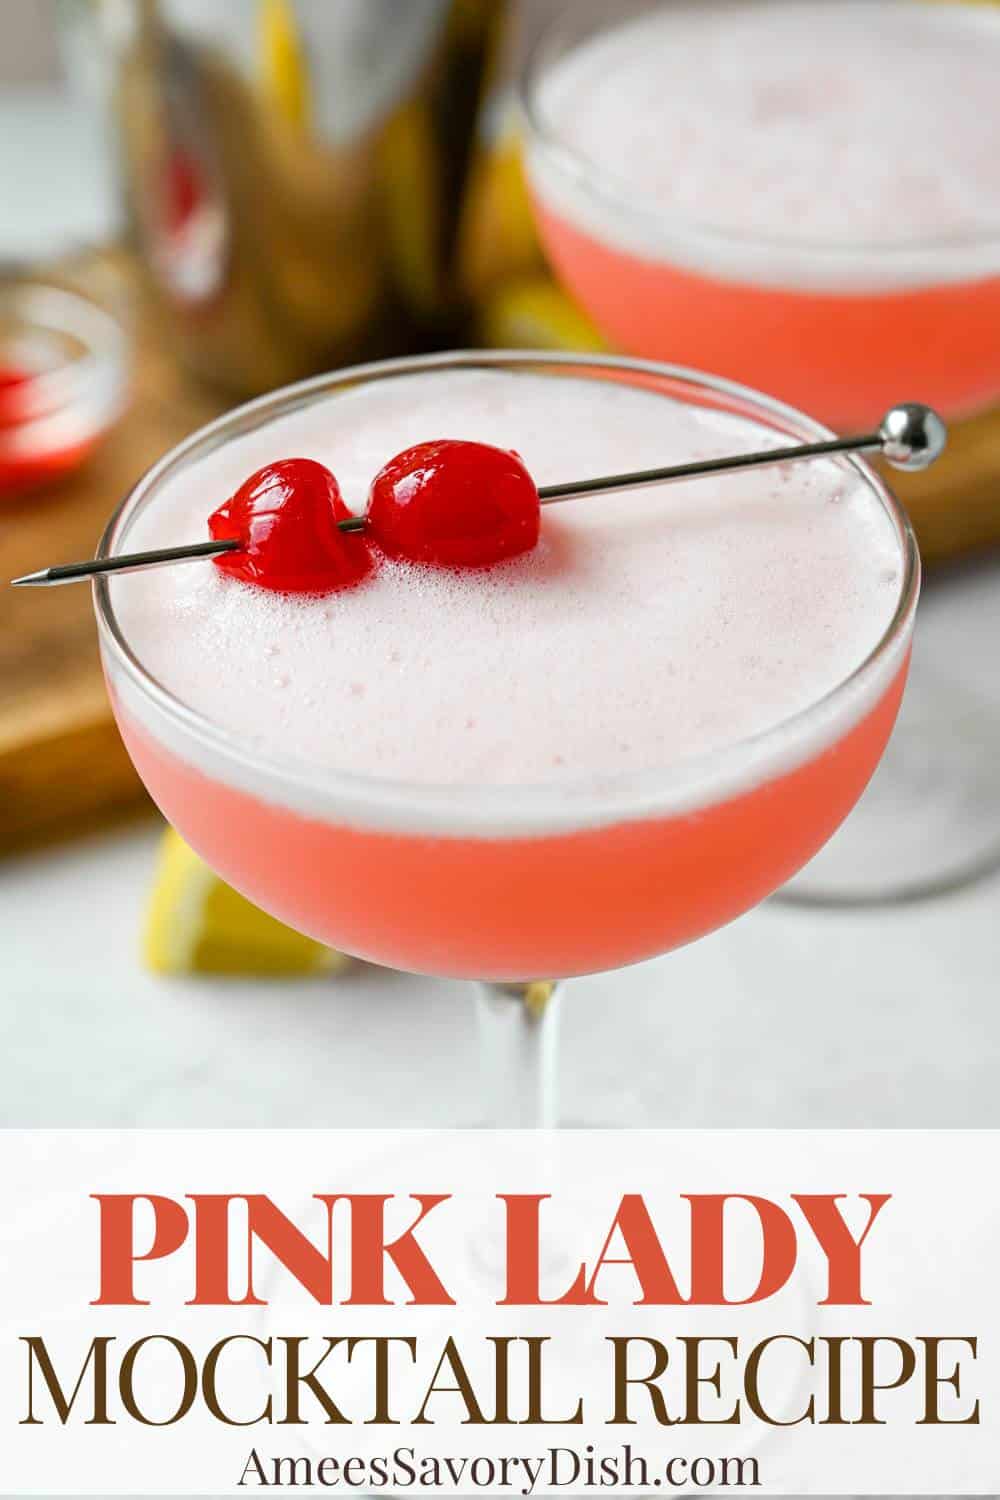 Master the art of mocktails with this booze-free Pink Lady recipe! It's the perfect fizzy and flavorful pink drink for your next party! via @Ameessavorydish